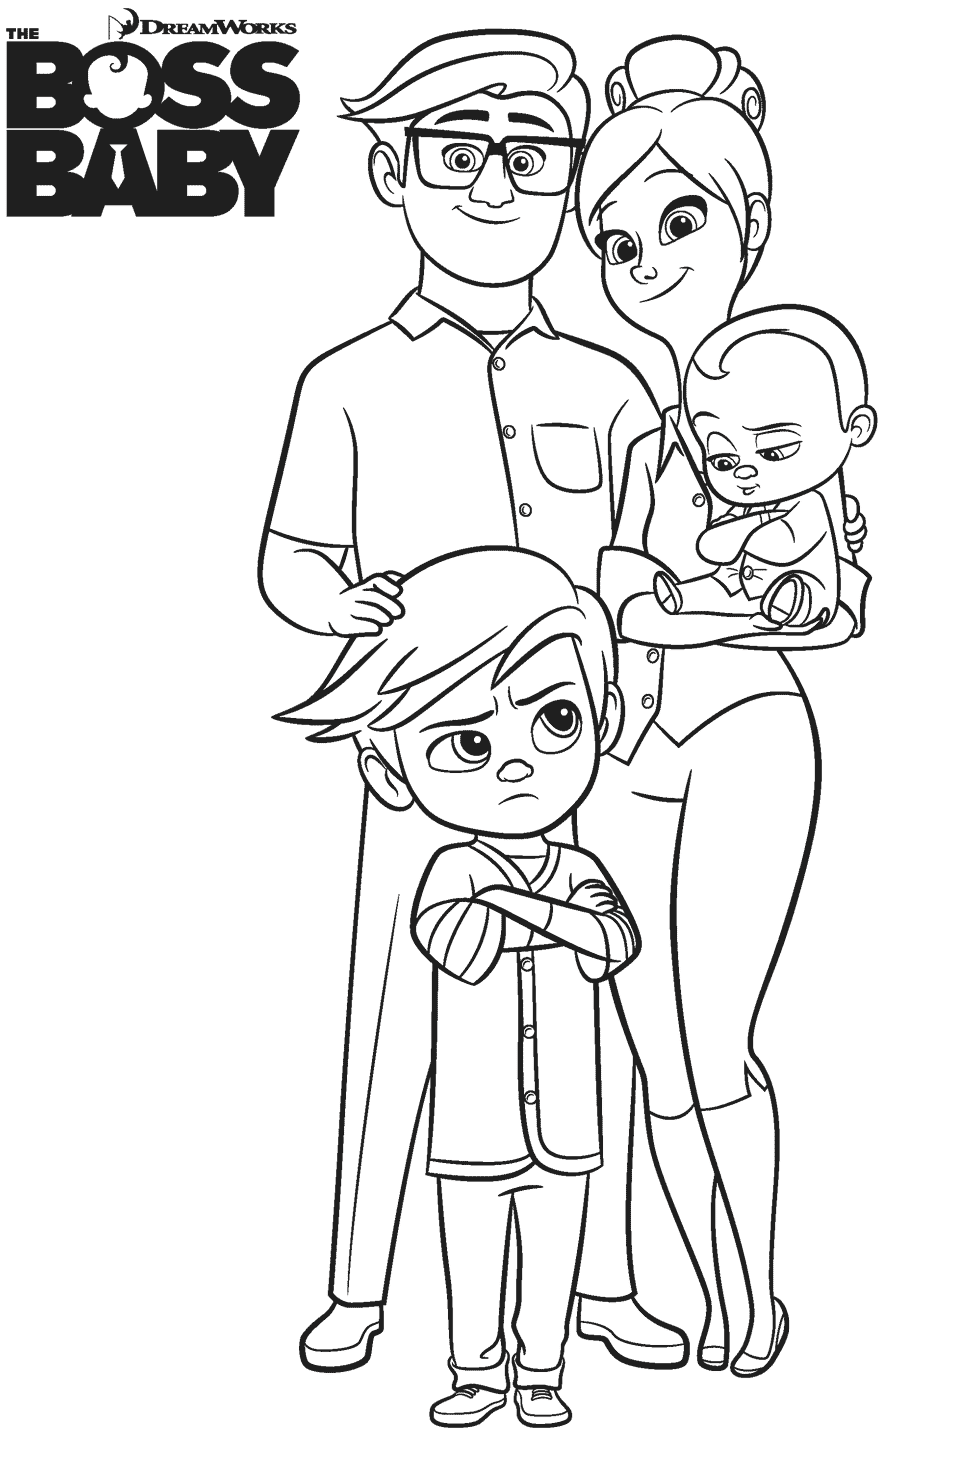 Family Of Boss Baby Coloring Page   Free Printable Coloring Pages ...